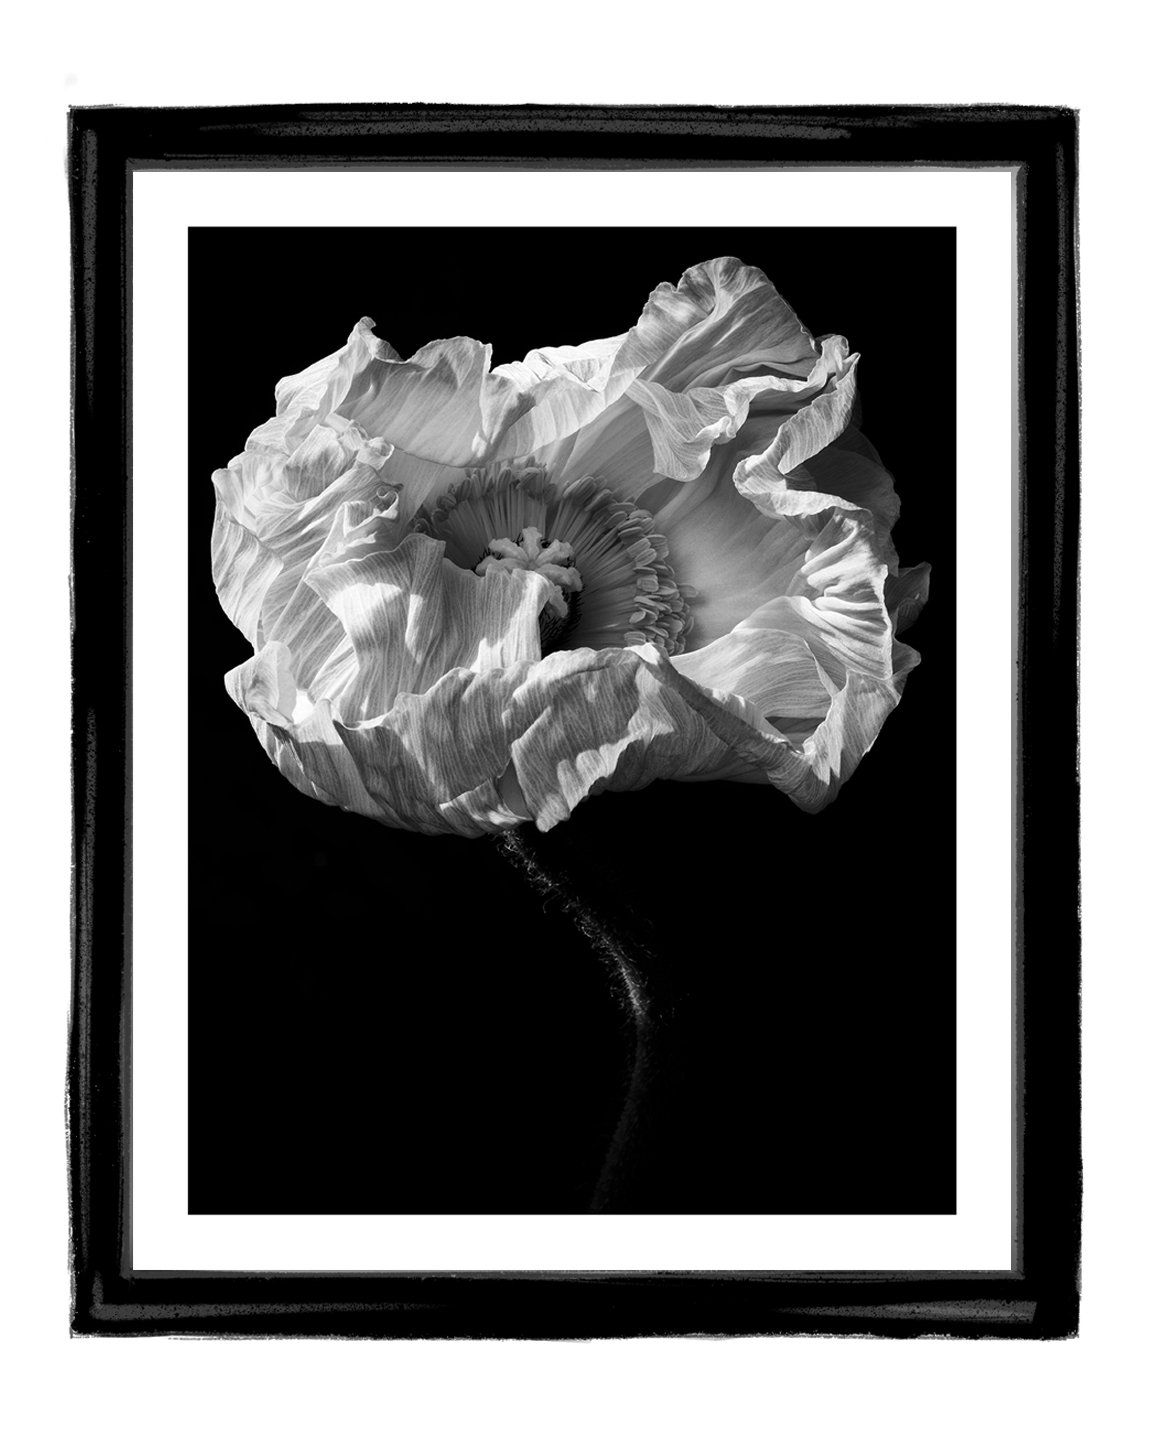 Collateral Beauty - flower art prints ELENA DRAGOI